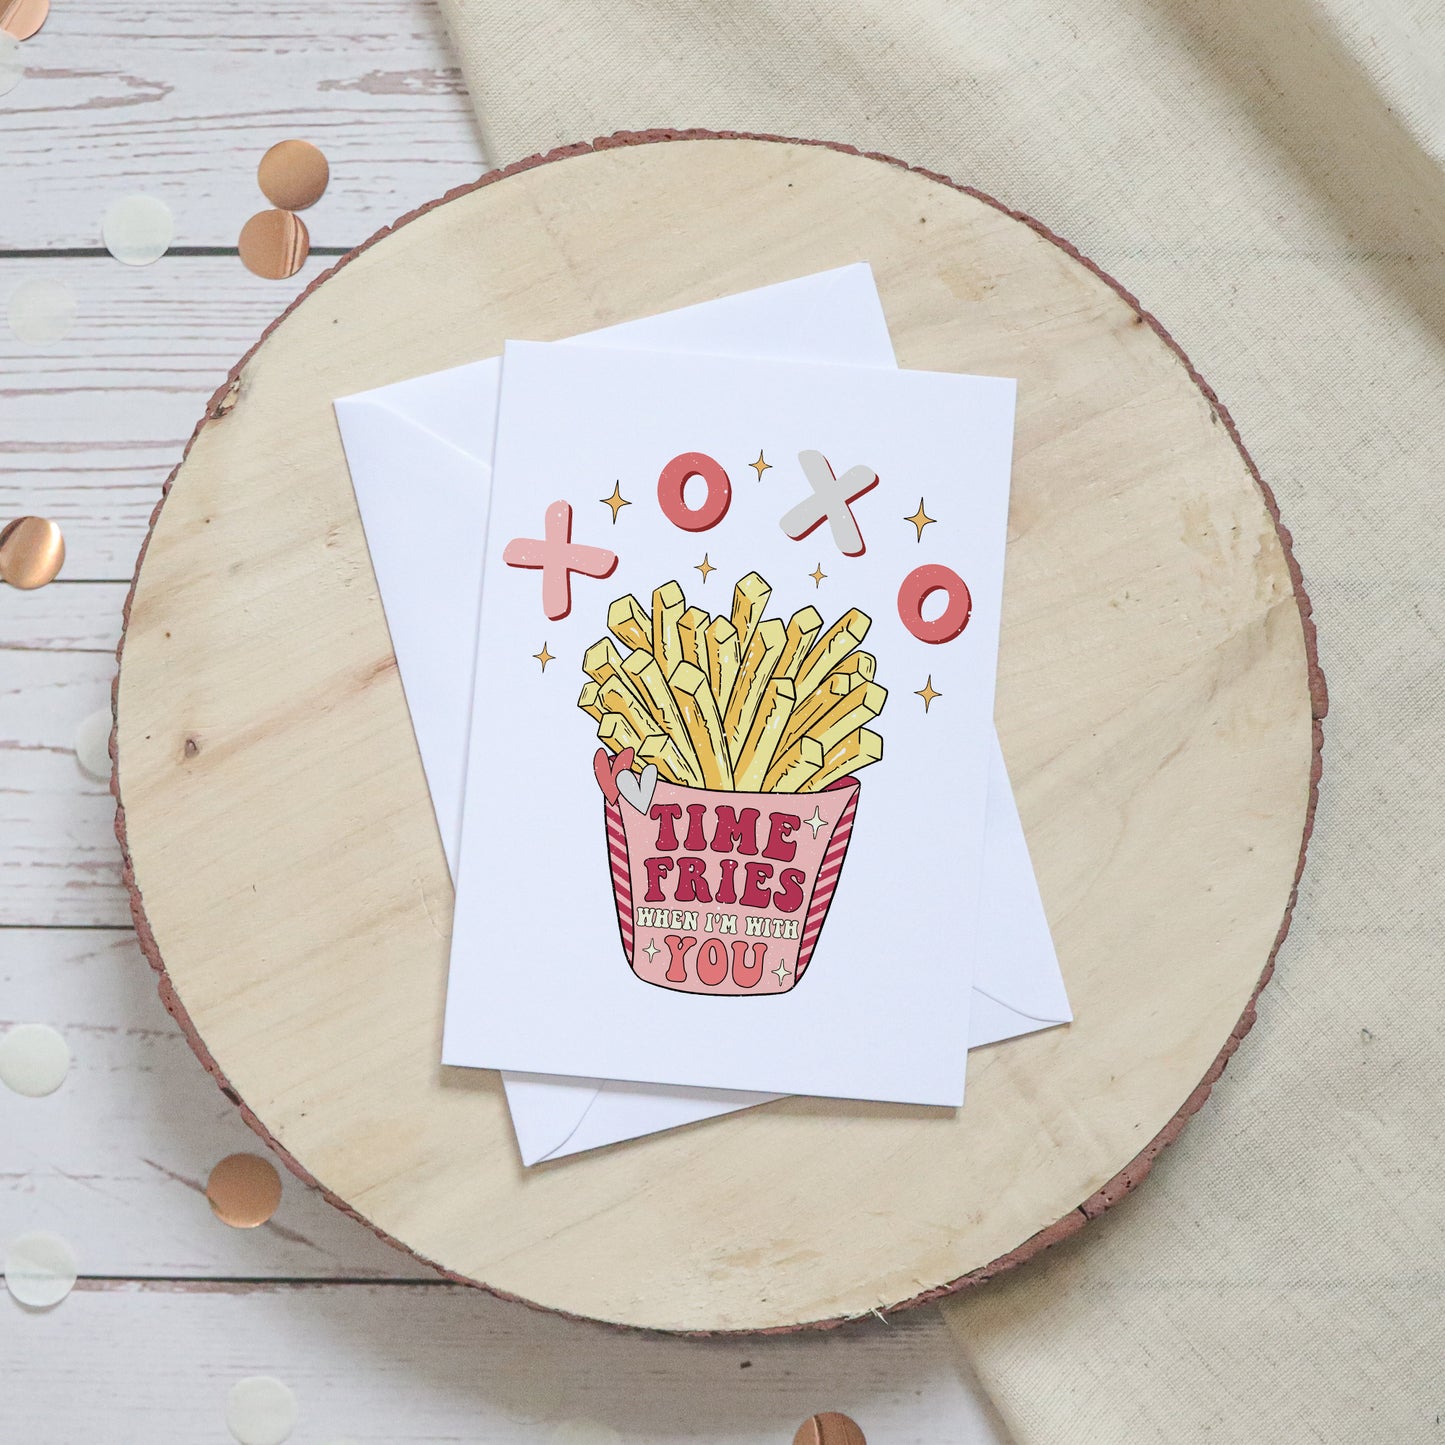 Funny 'Time Fries' Valentine's Card